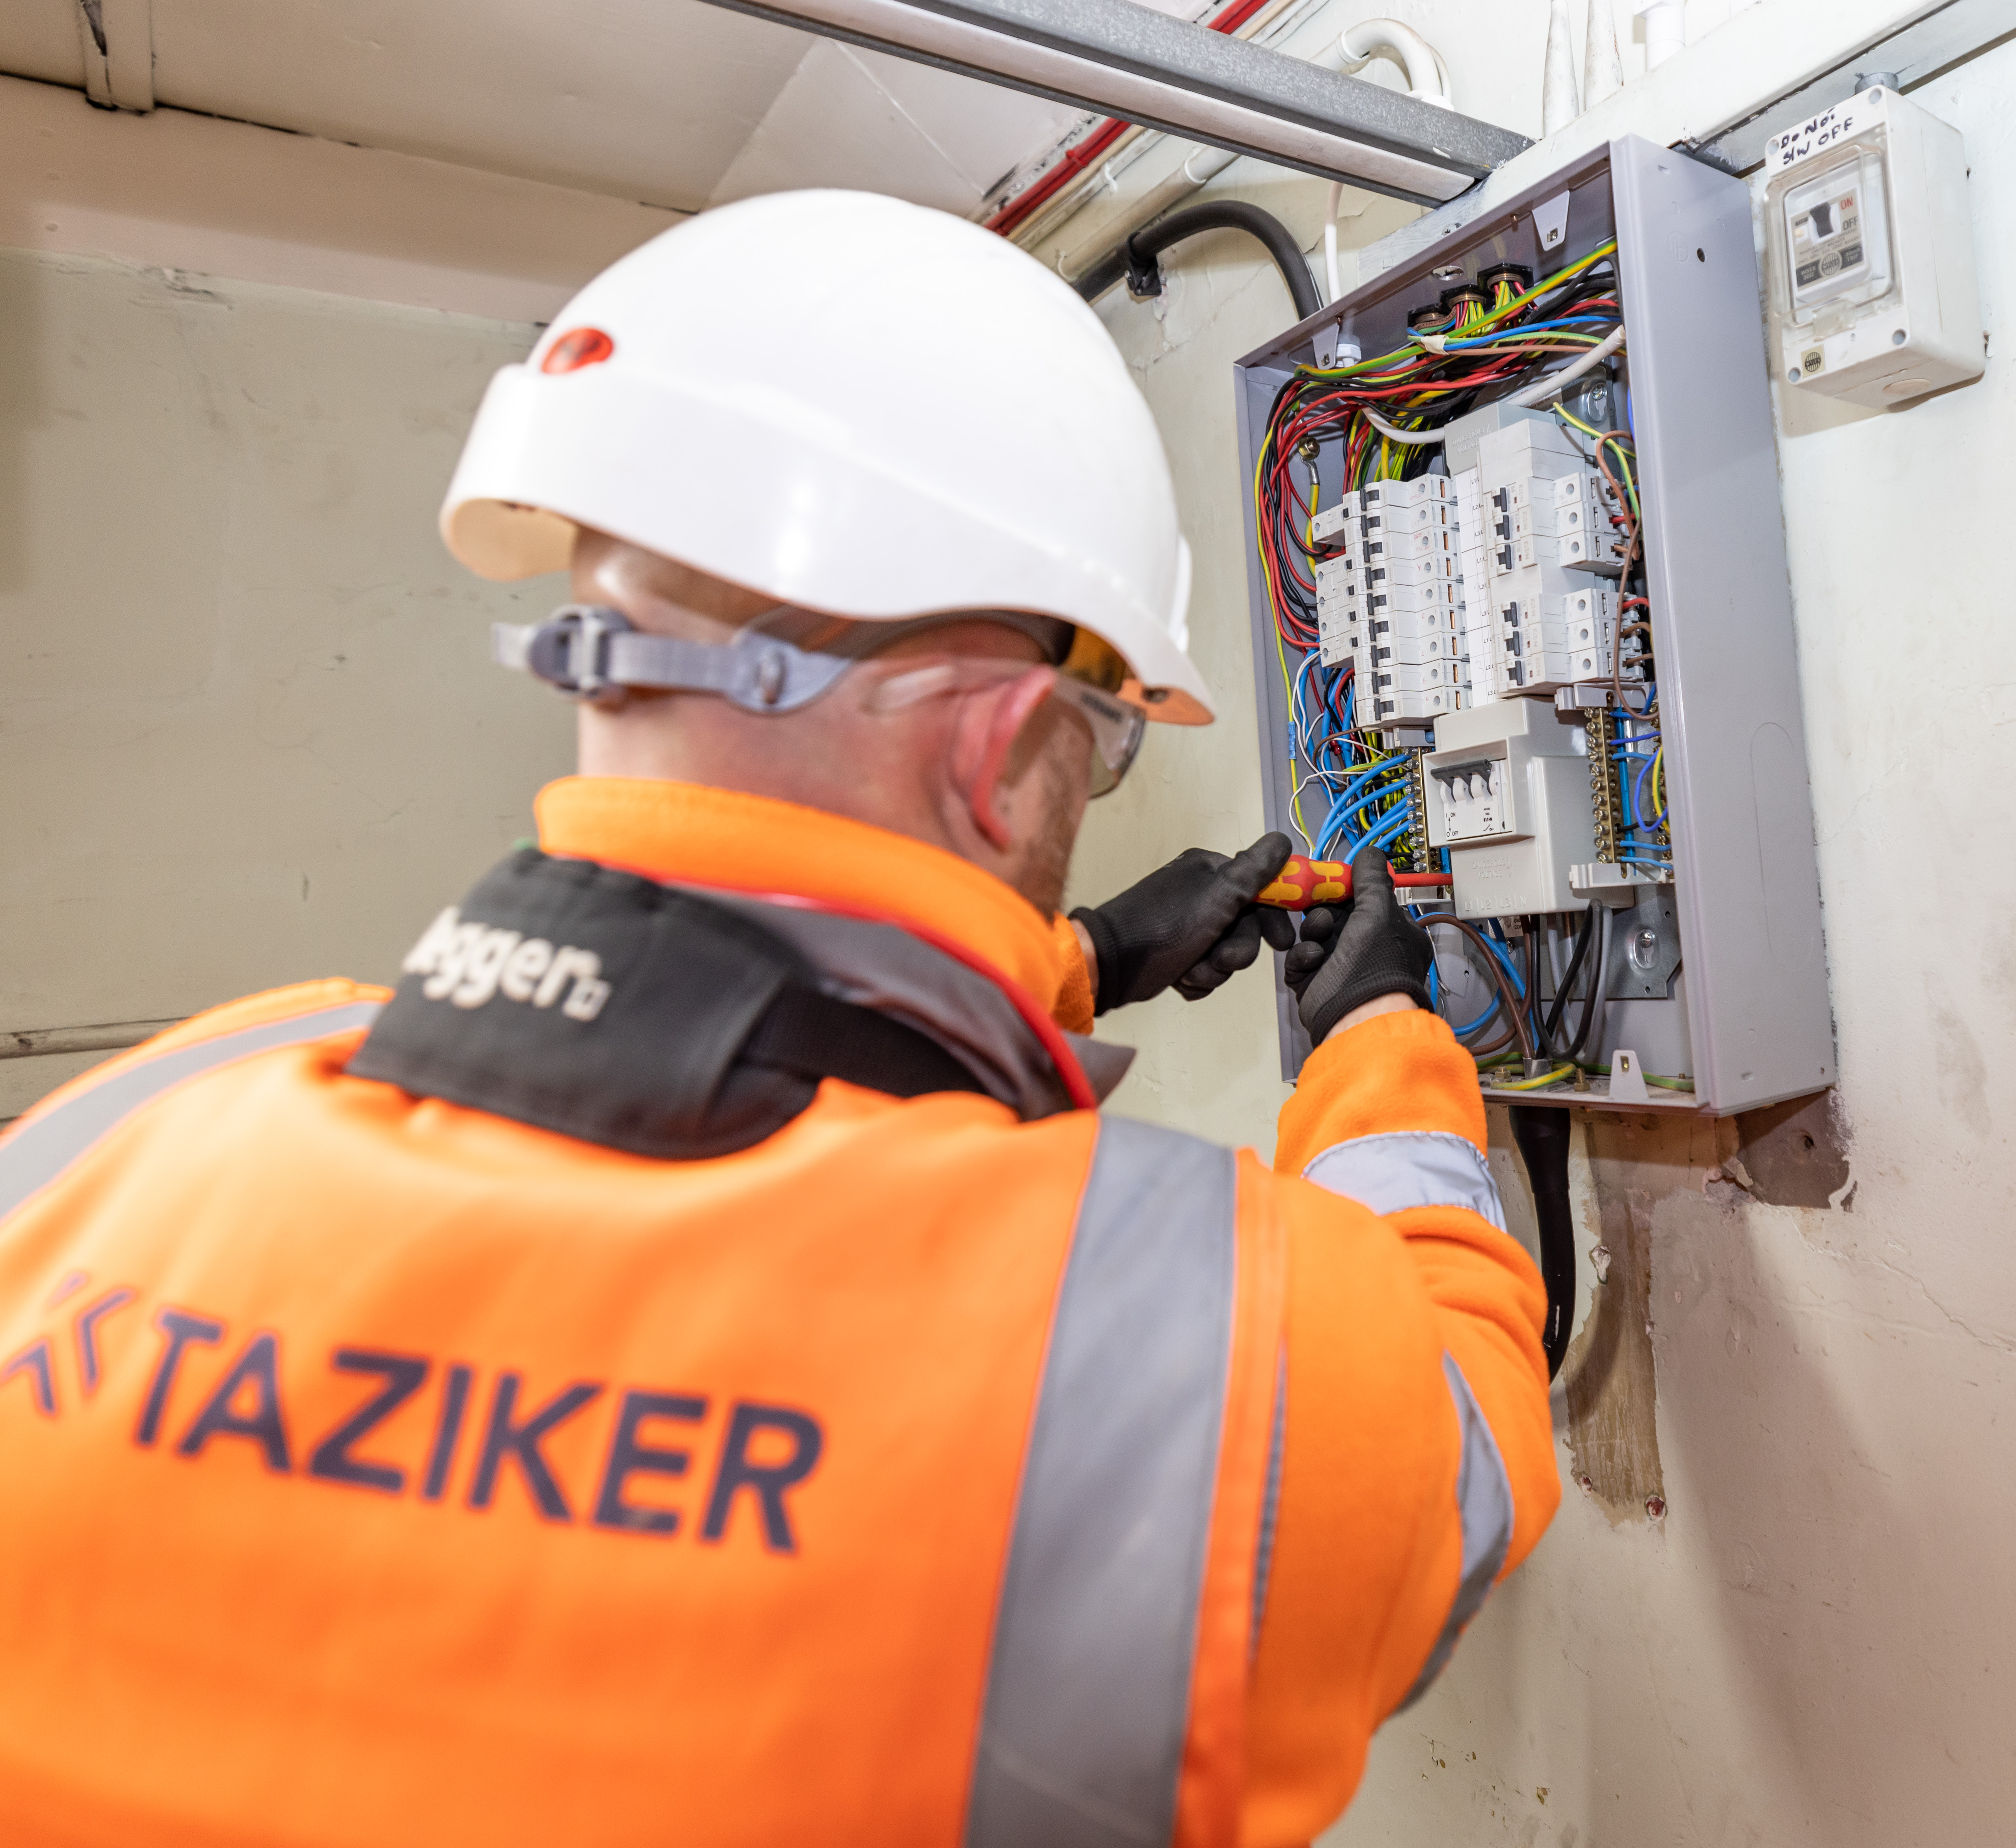 Electrician wearing Taziker branded PPE carrying out electrical works on a fuse box.